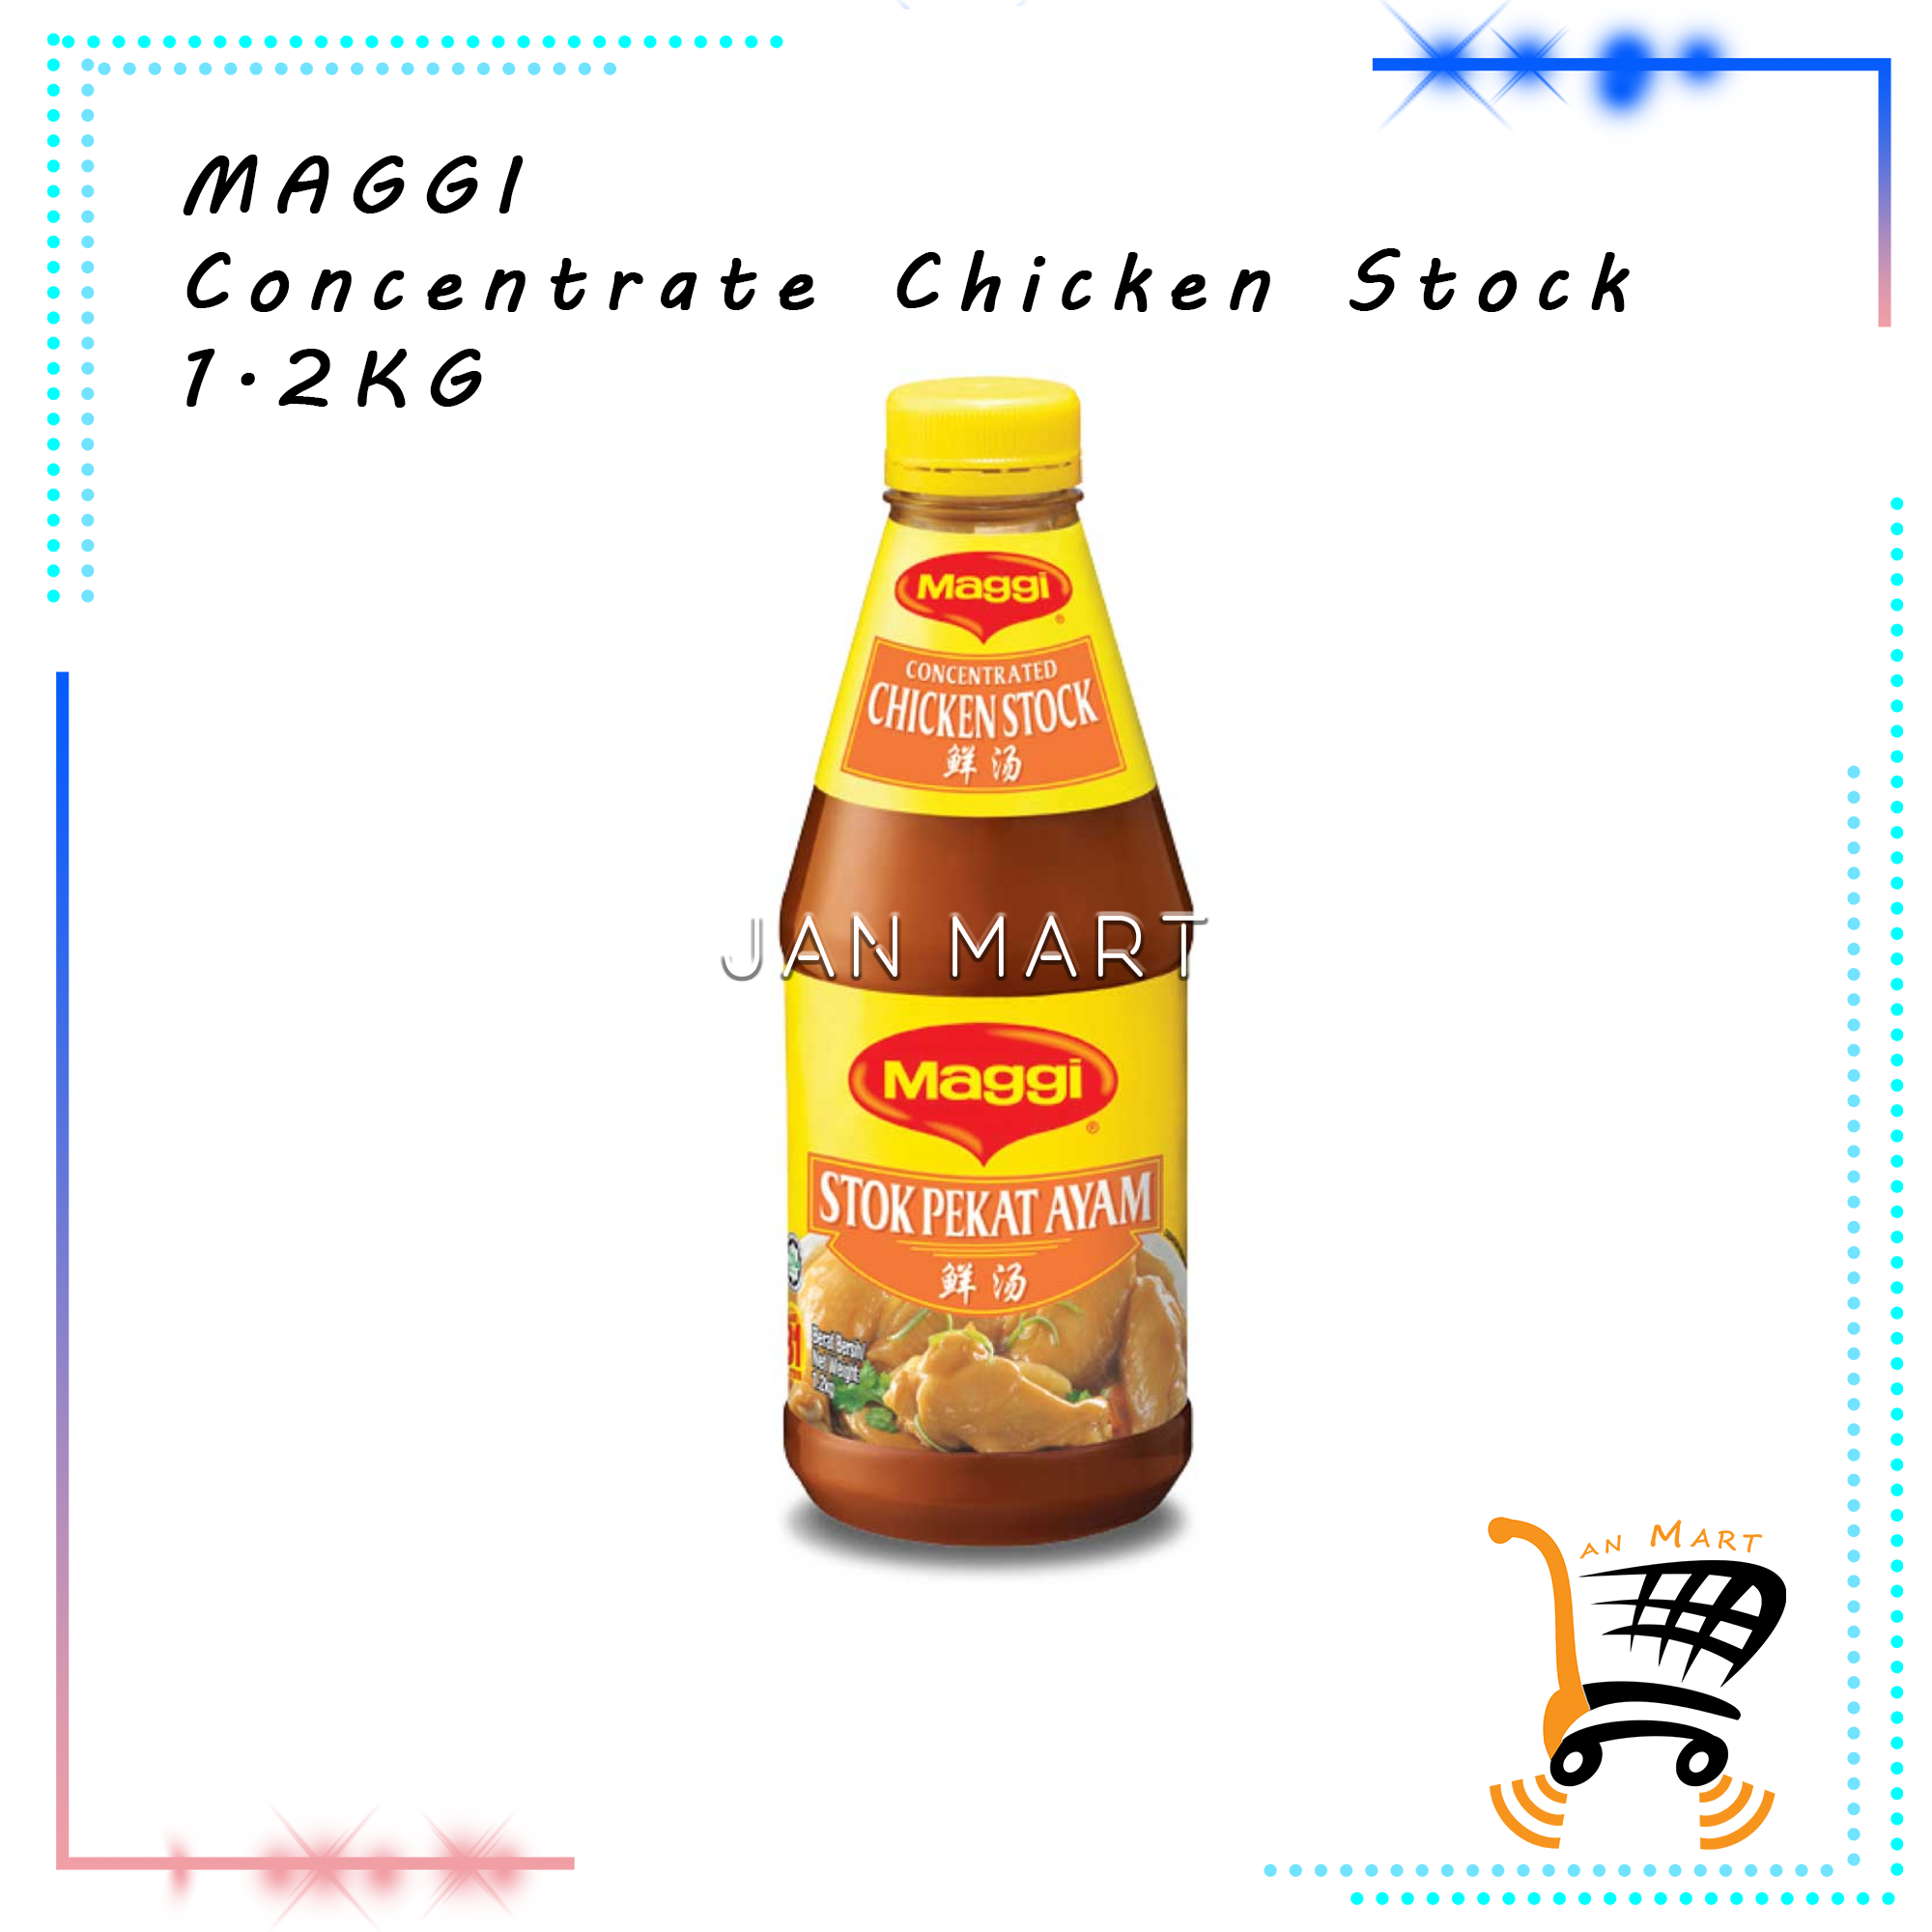 MAGGI Concentrated Chicken Stock 1.2KG